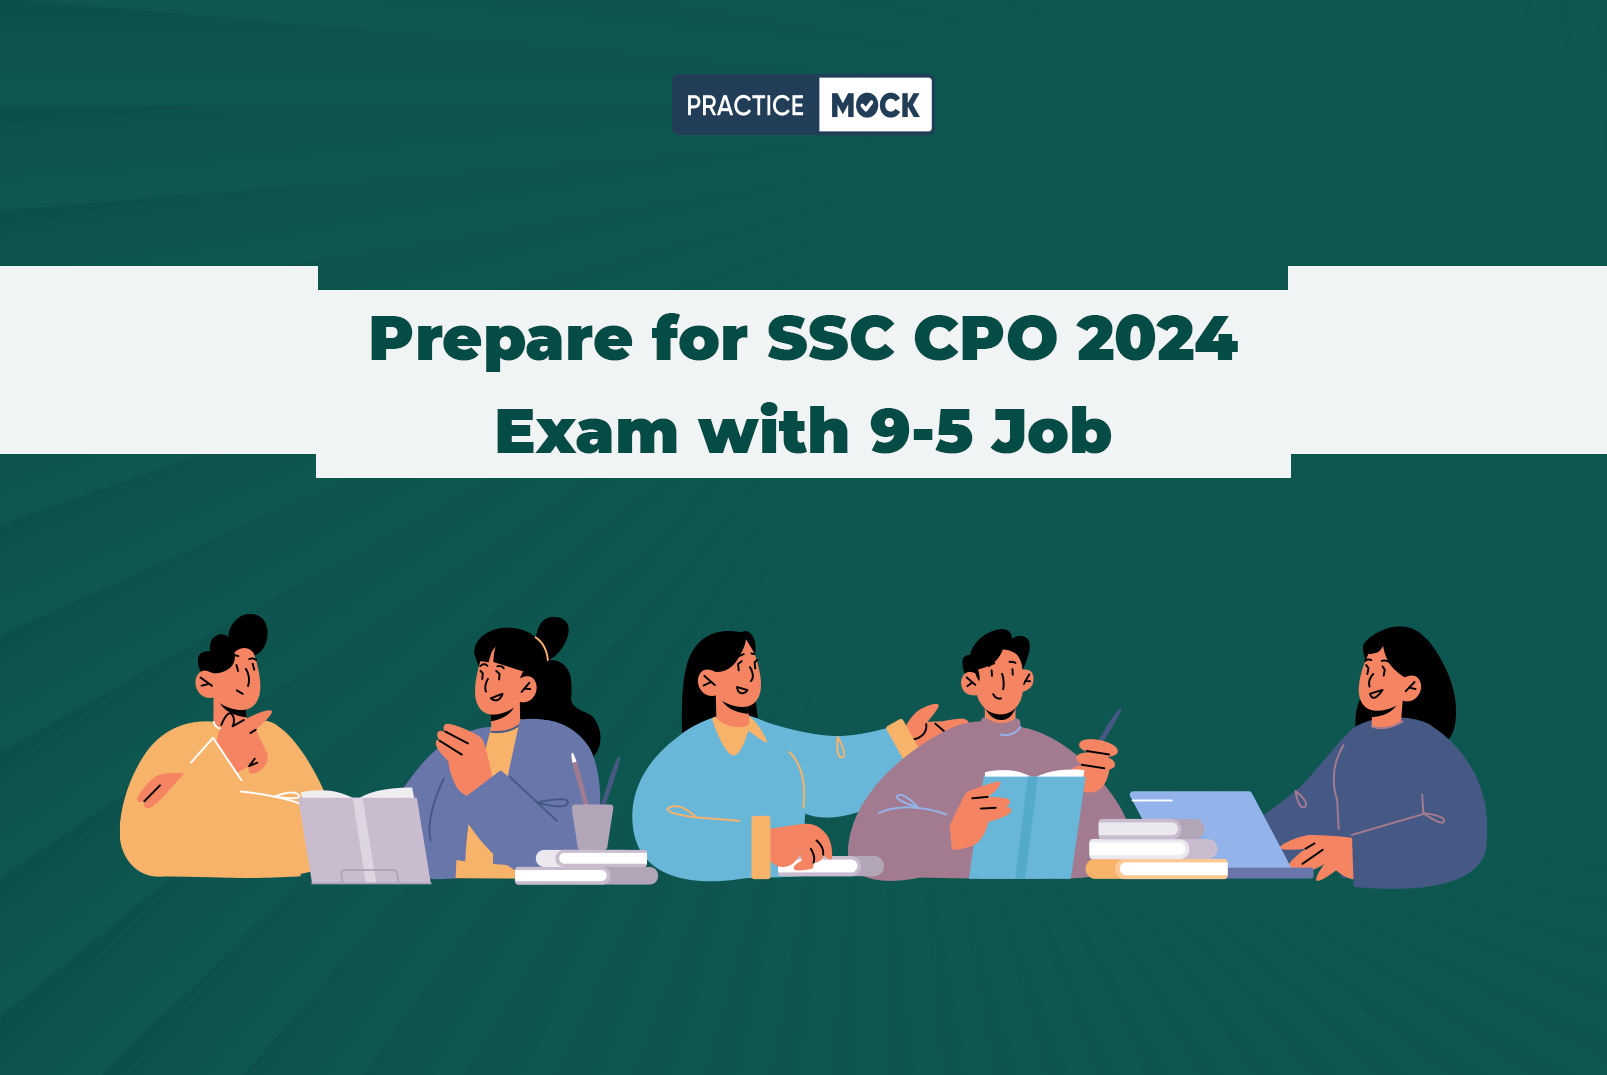 Prepare for SSC CPO 2024 Exam with 9-5 Job